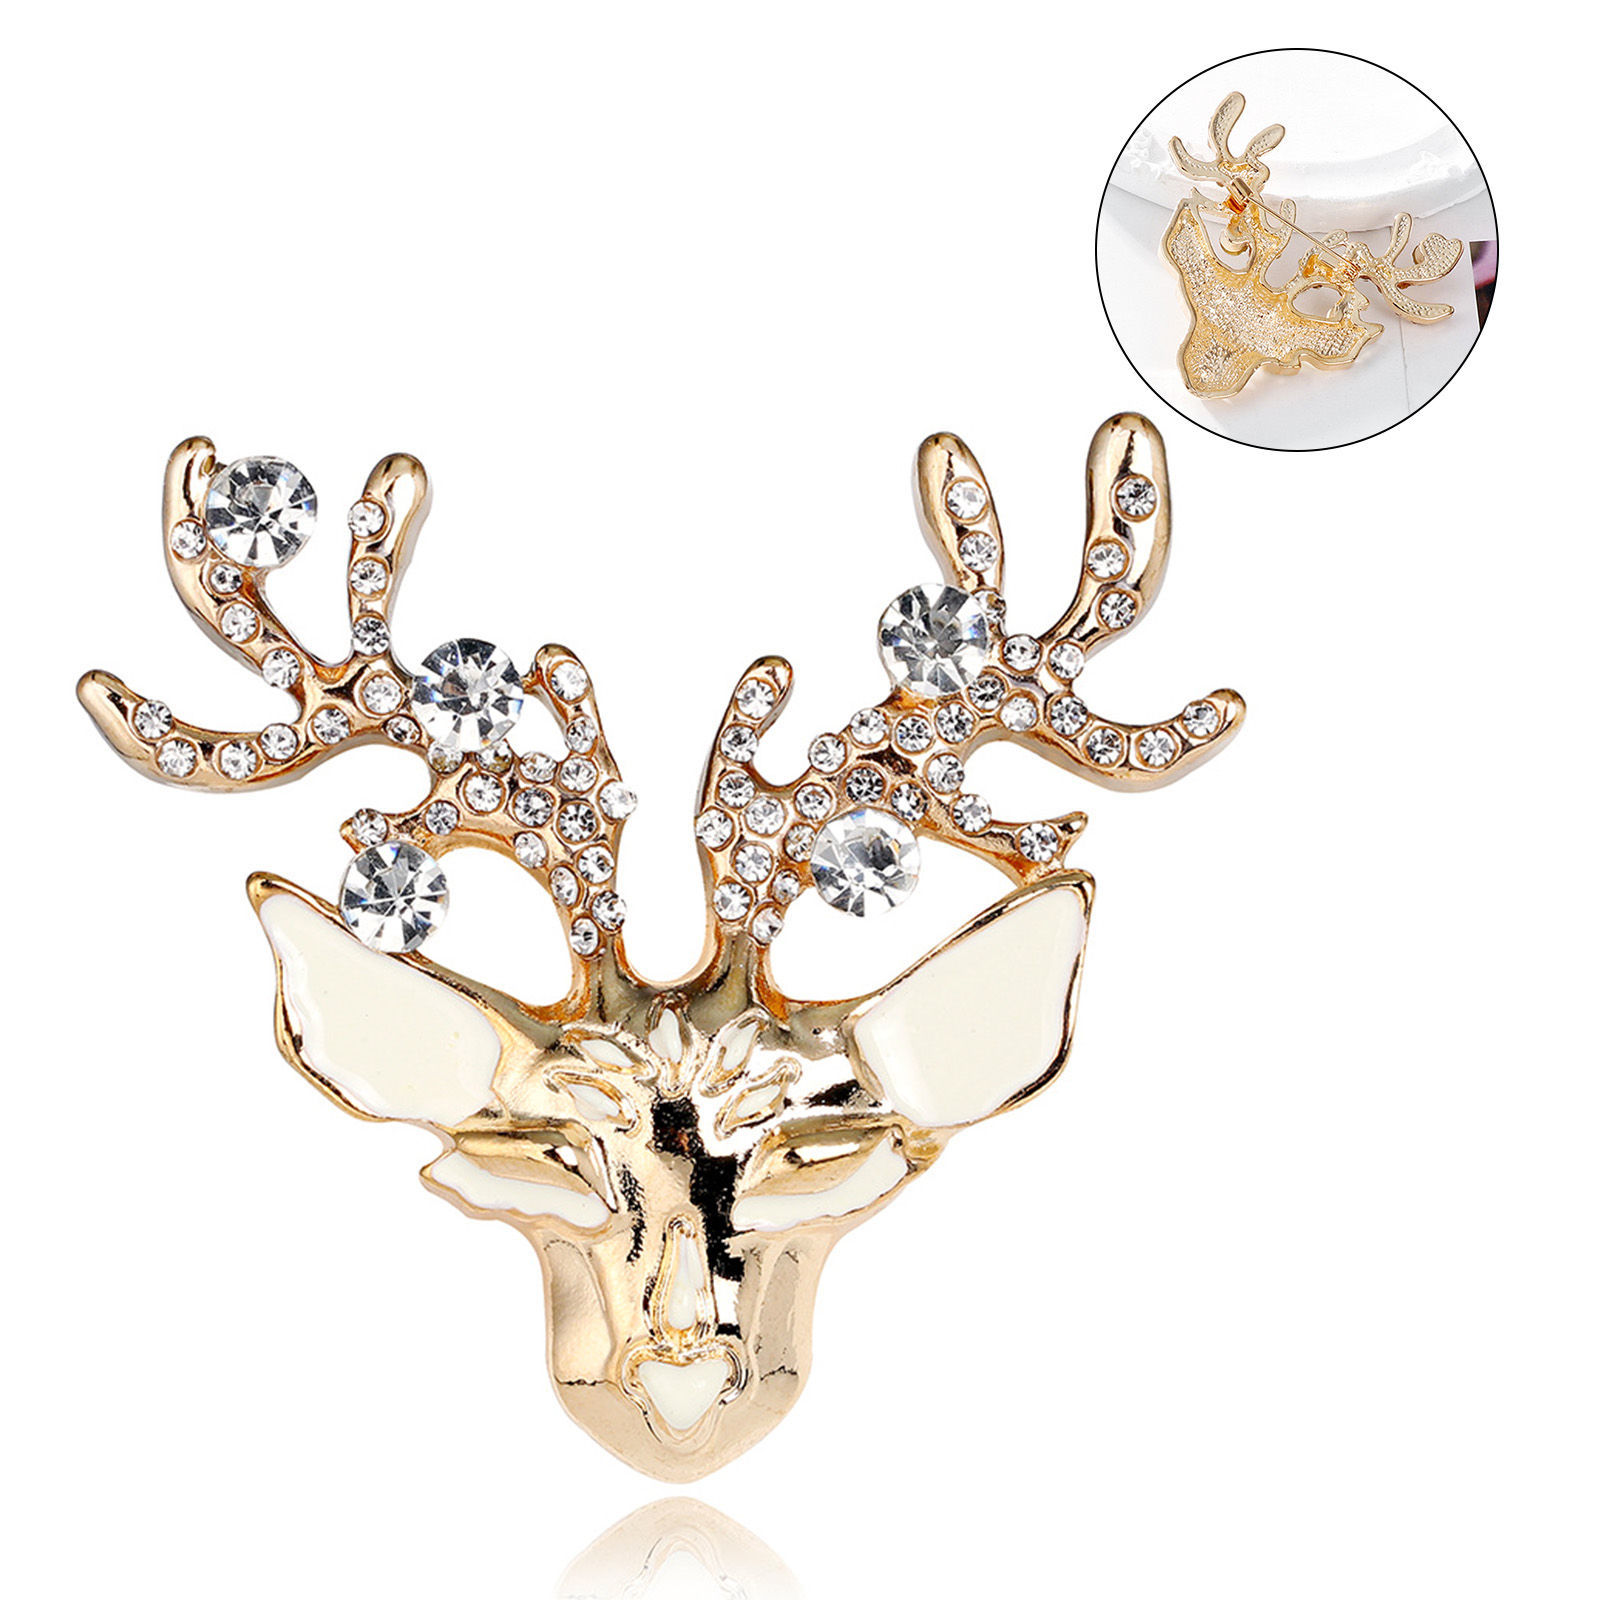 Picture of Retro Pin Brooches Christmas Reindeer Gold Plated Clear Rhinestone 5.3cm x 4.9cm, 1 Piece